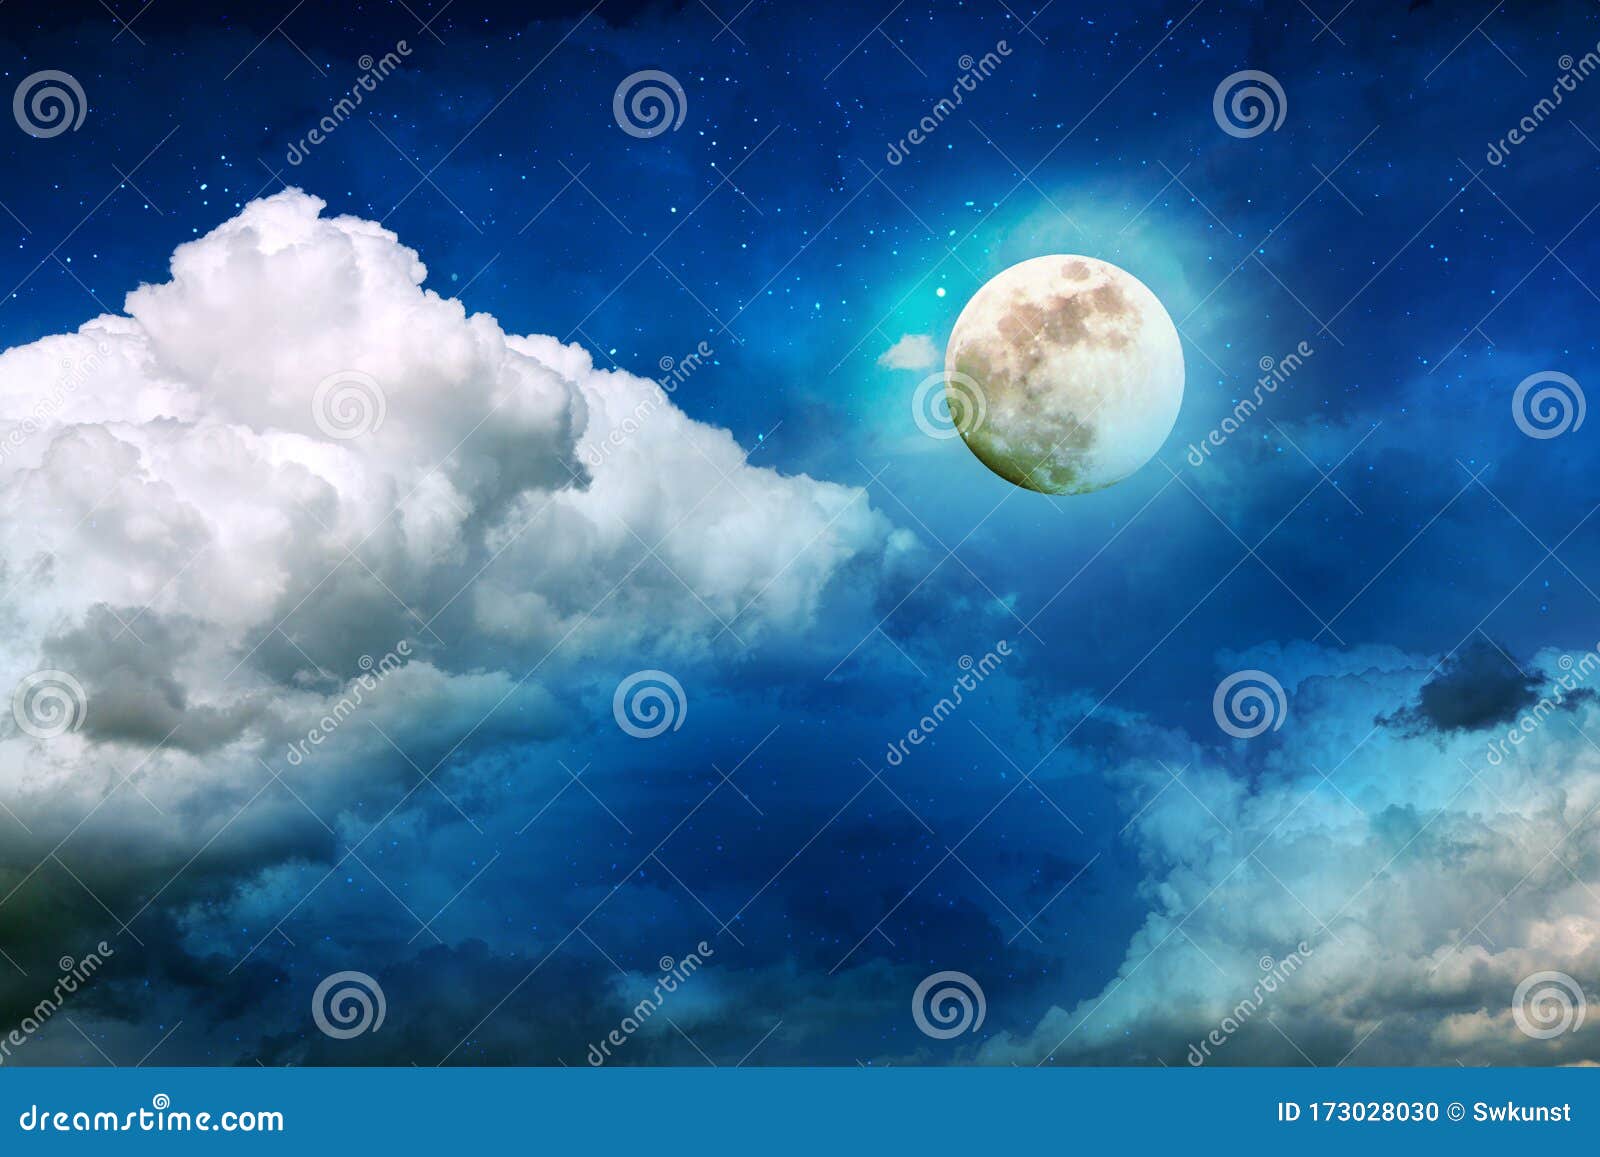 Night Sky Moon Illustration Background Wallpaper Image For Free Download   Pngtree